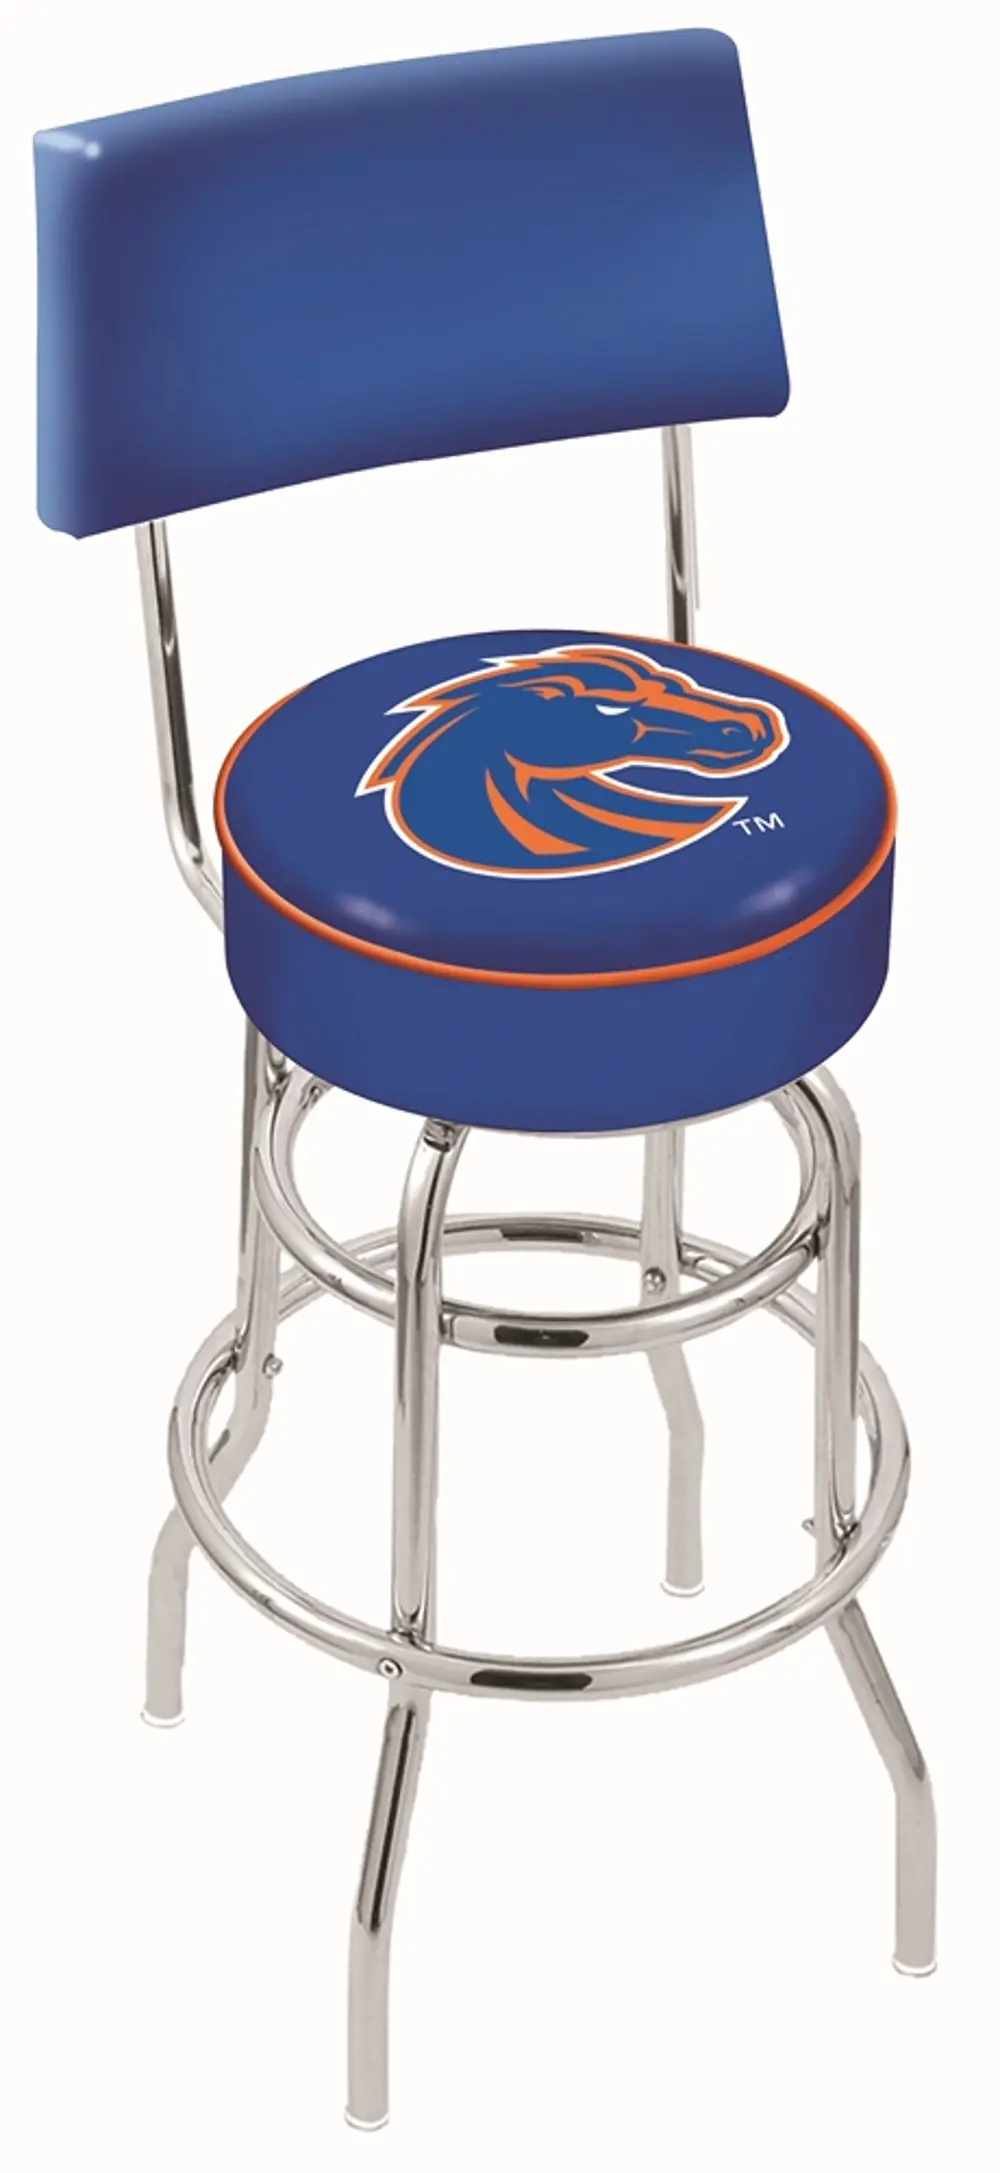 Chrome Swivel Counter Height Stool with Back Rest - Boise State-1